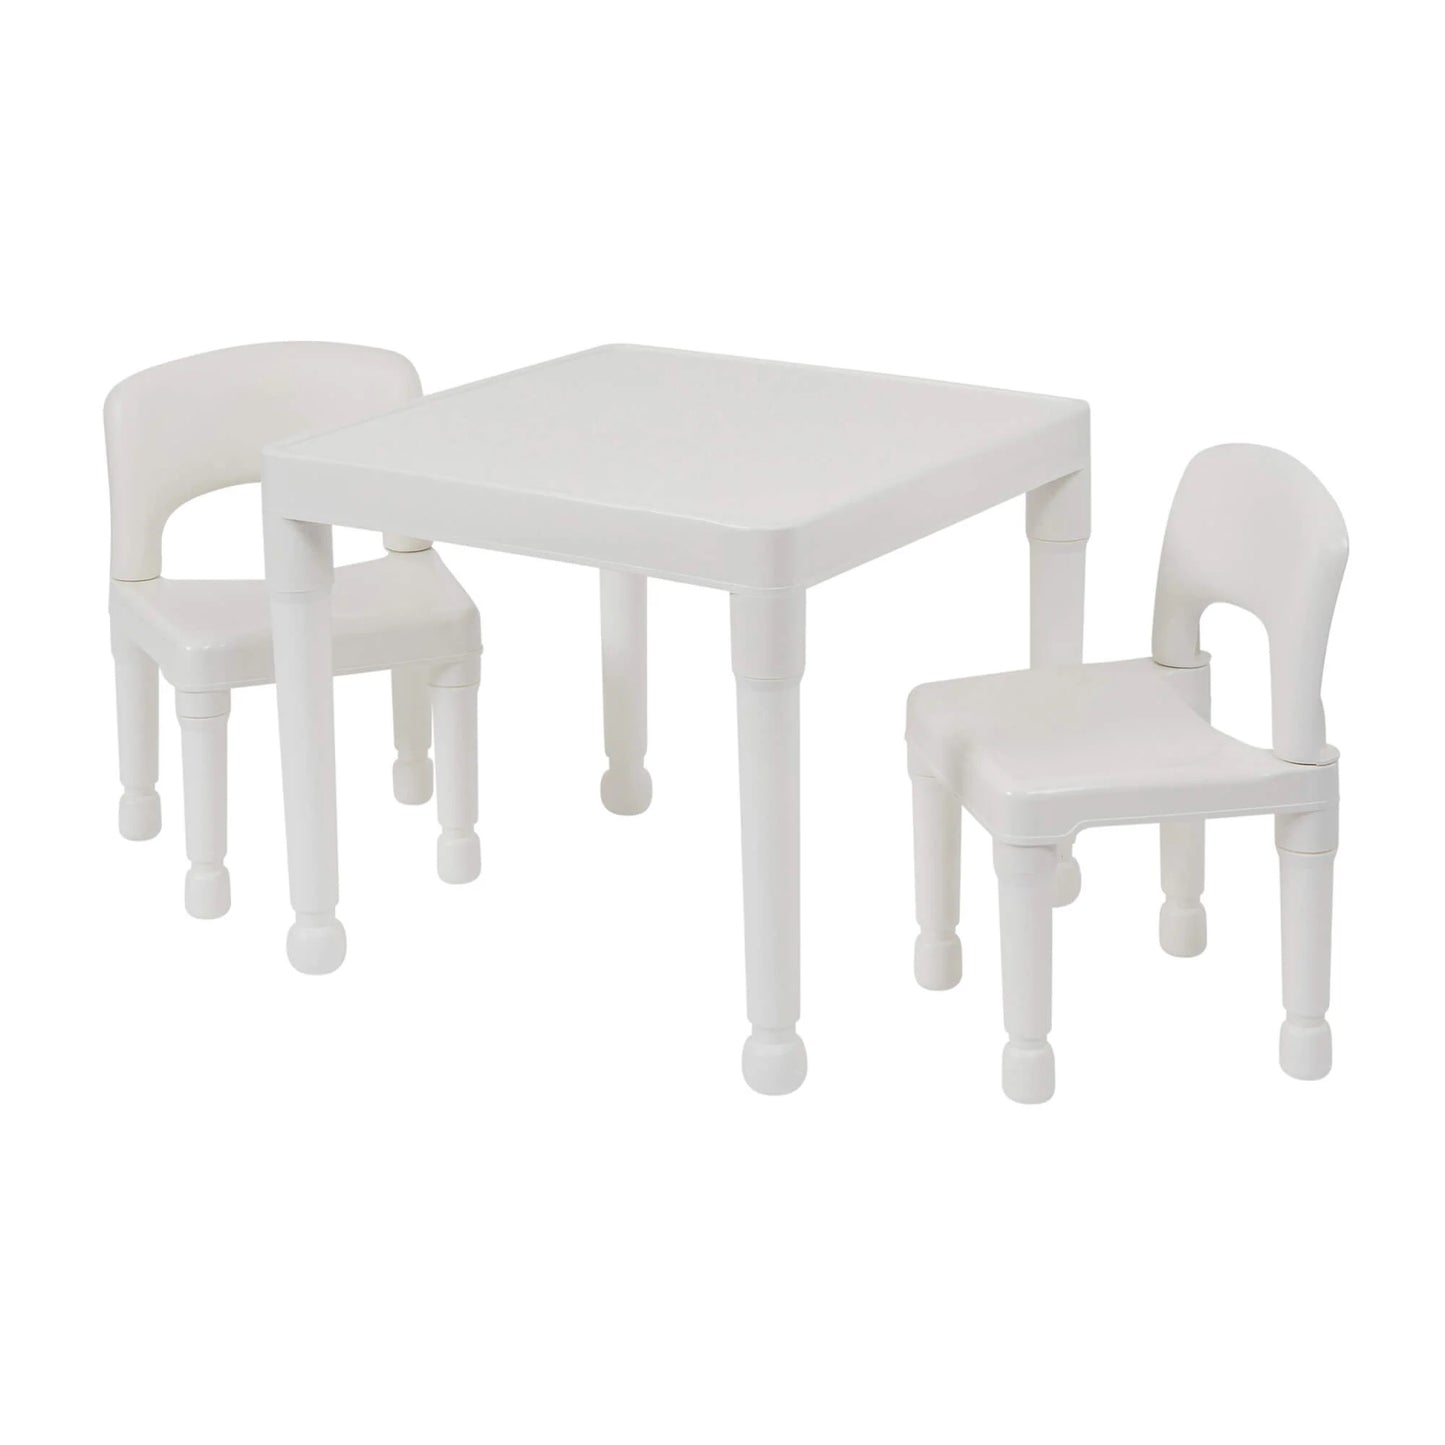 Kids Plastic Table and 2 Chair Set